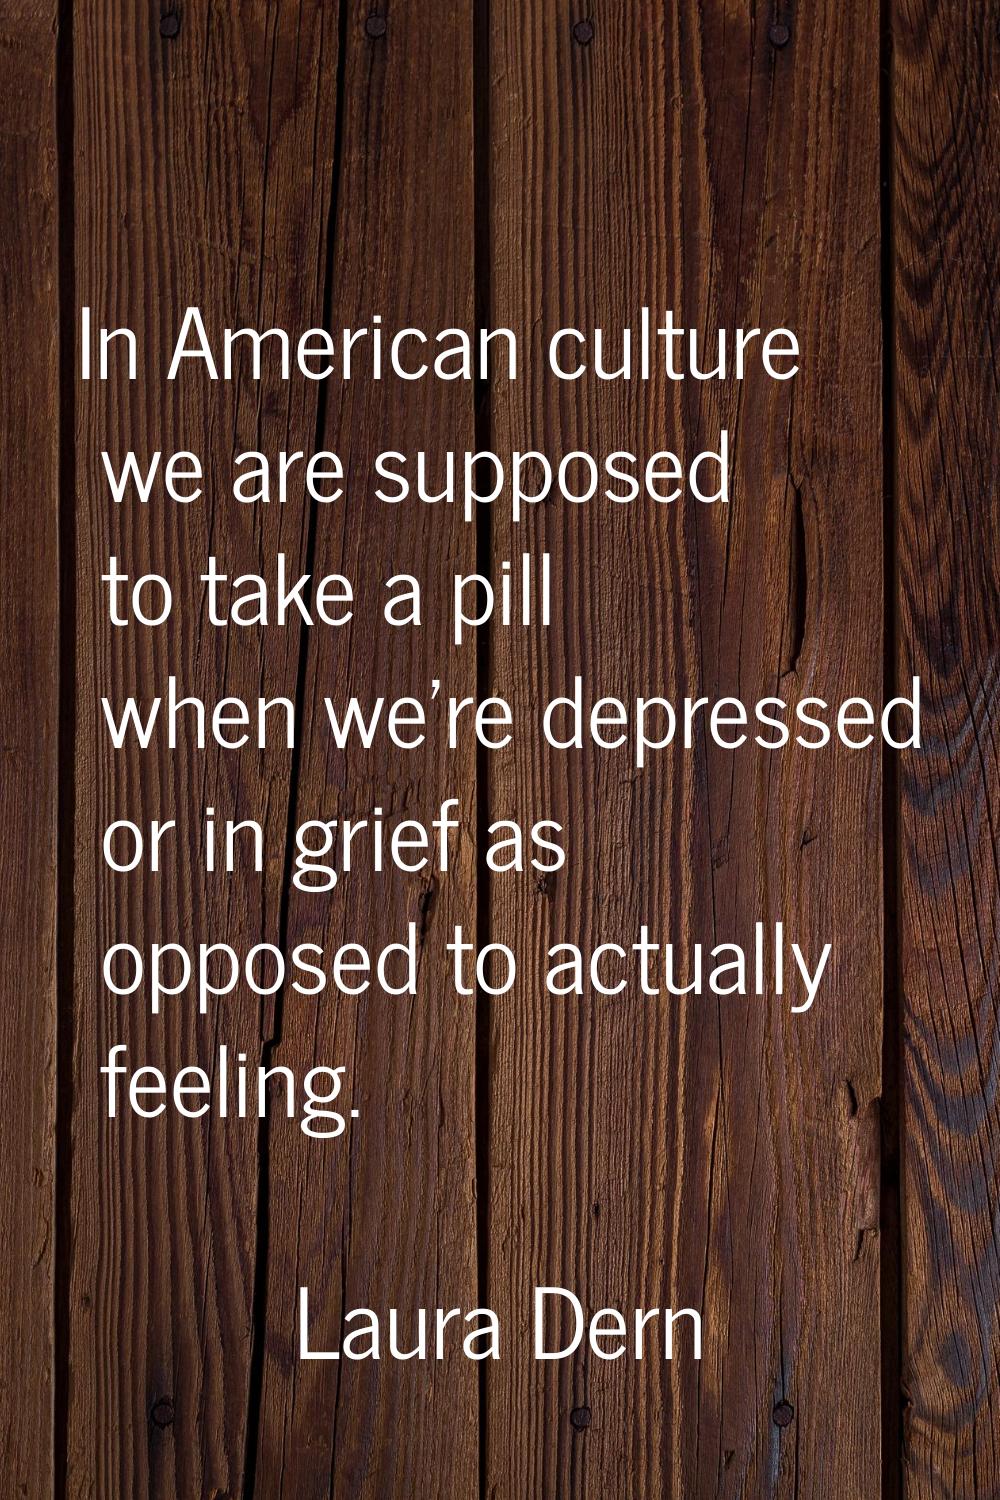 In American culture we are supposed to take a pill when we're depressed or in grief as opposed to a